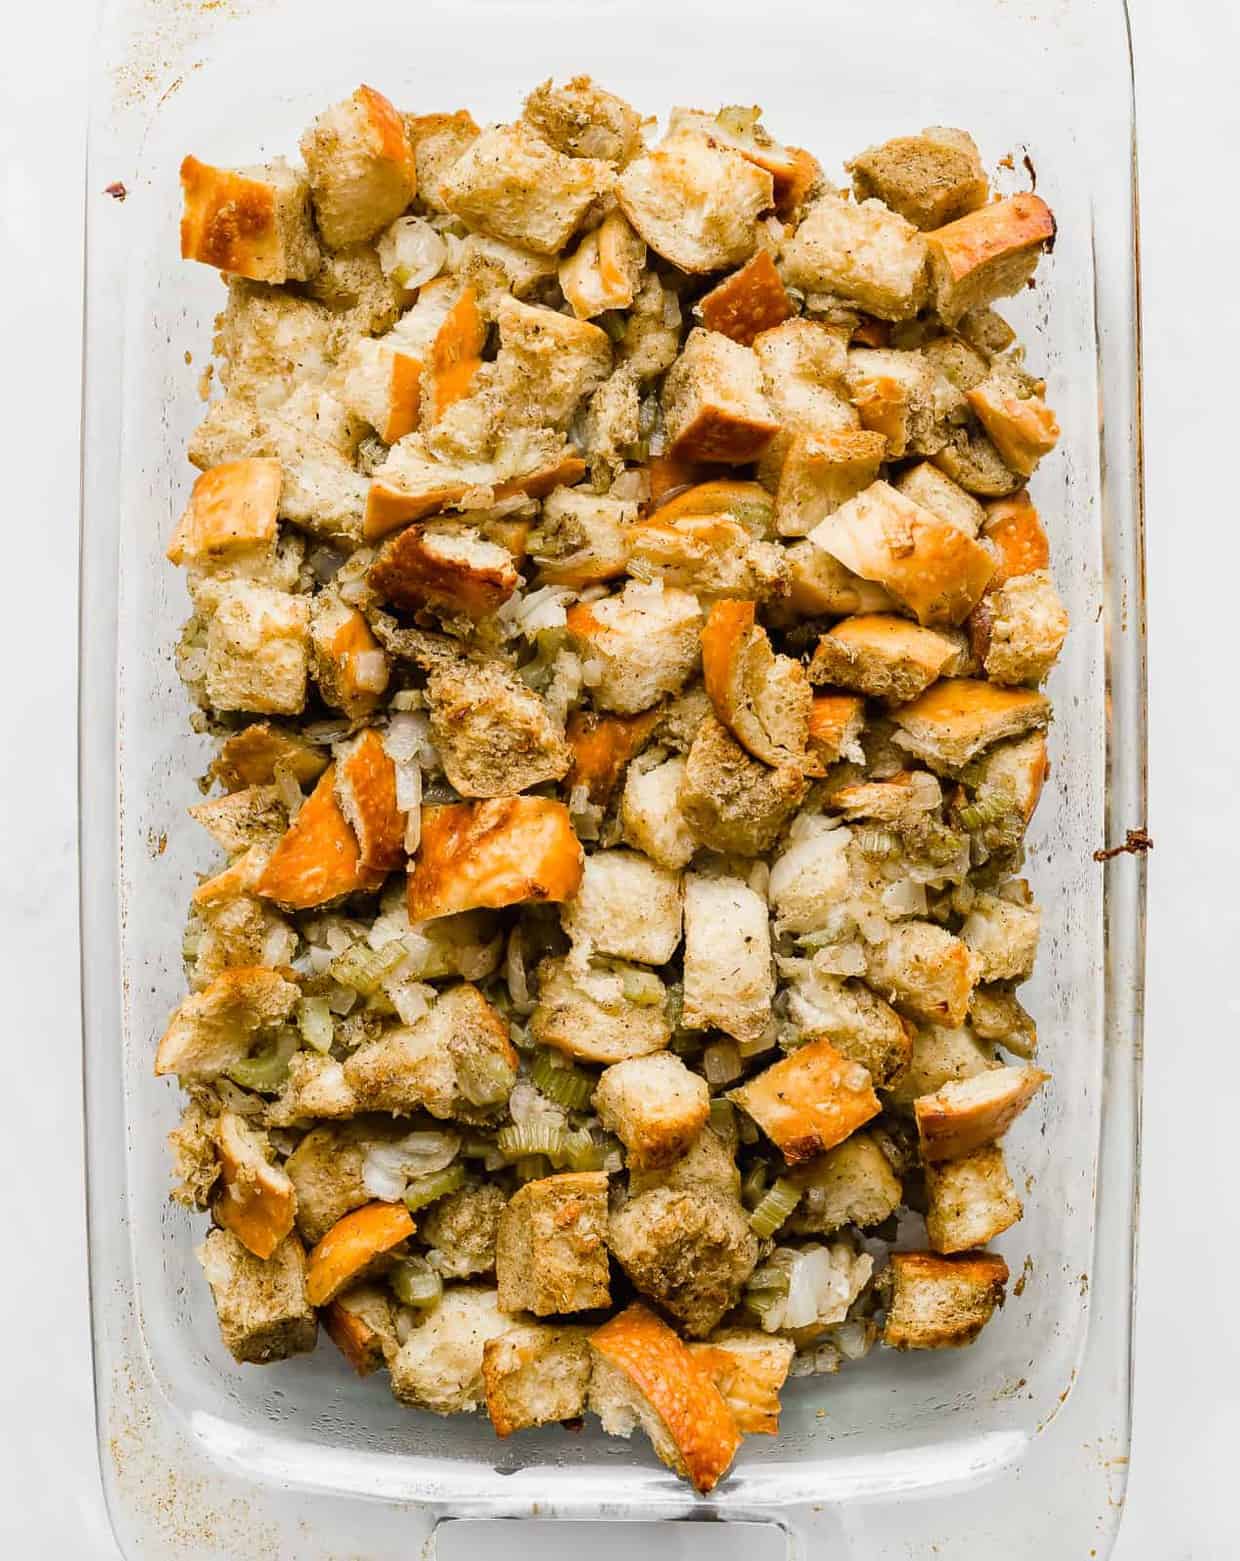 Golden brown thanksgiving stuffing in a 13x9 inch clear baking dish.